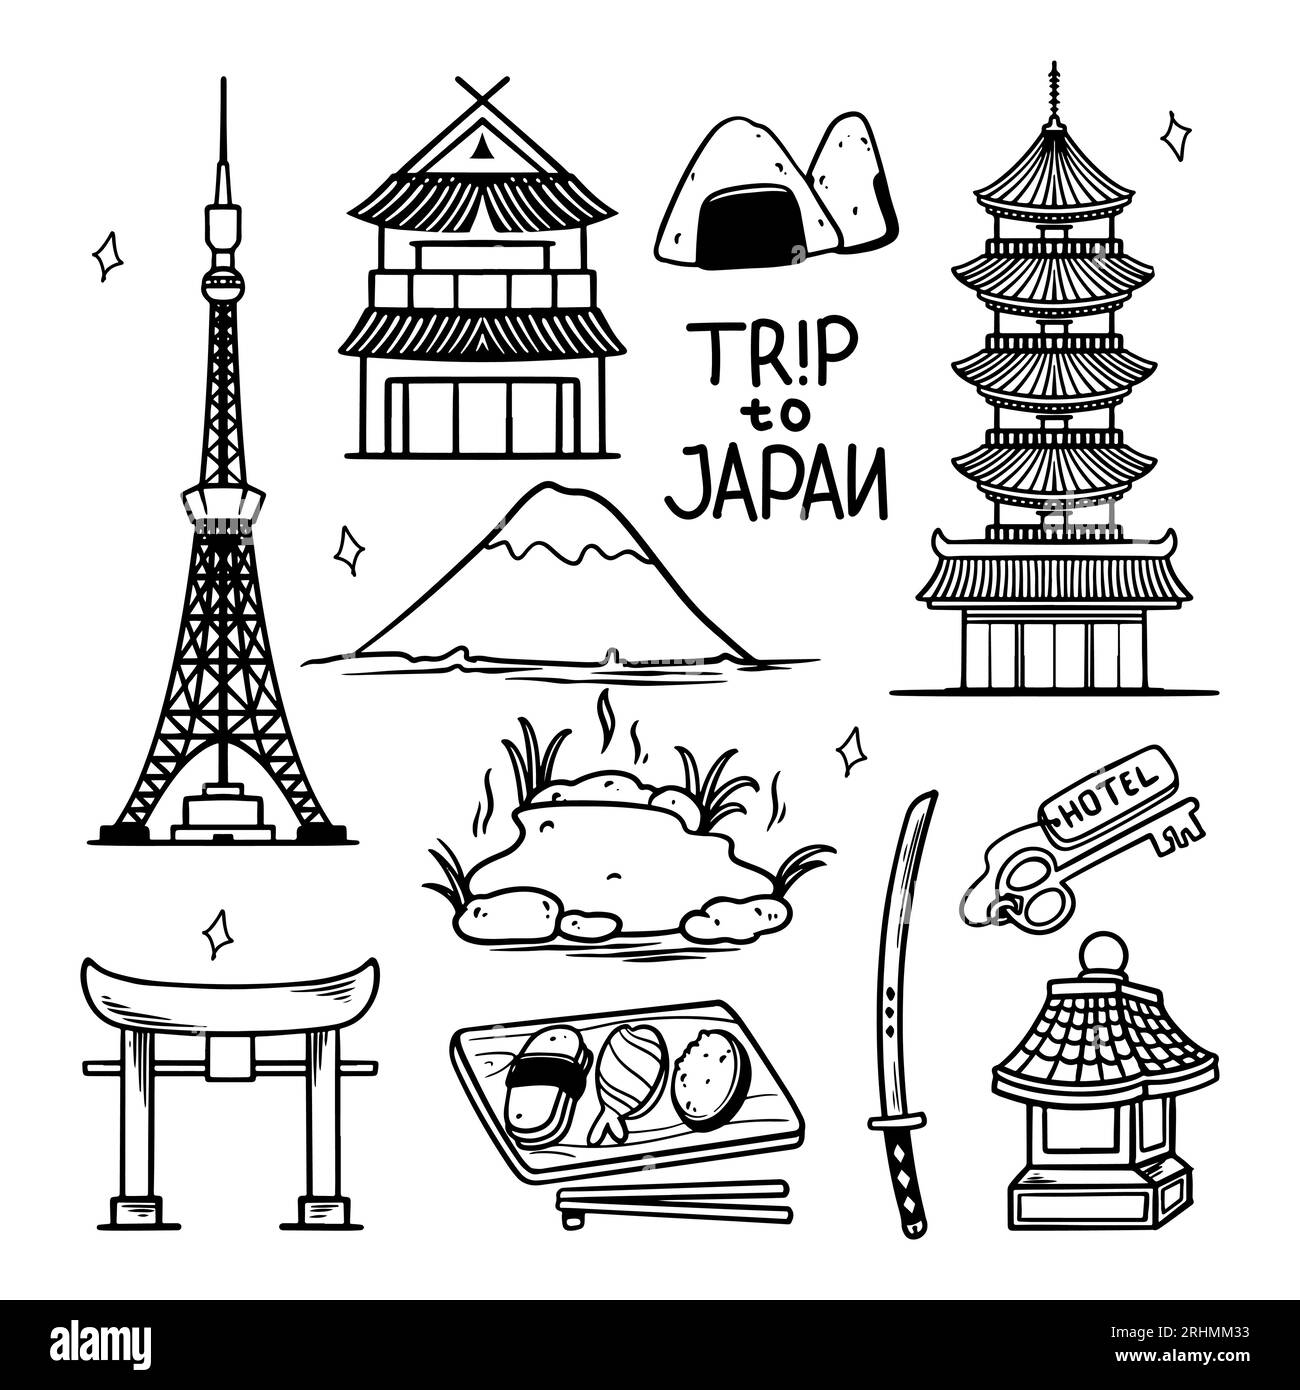 Japan travel doodle set icon. Hand drawn Japanese place building and object sketch. Stock Vector